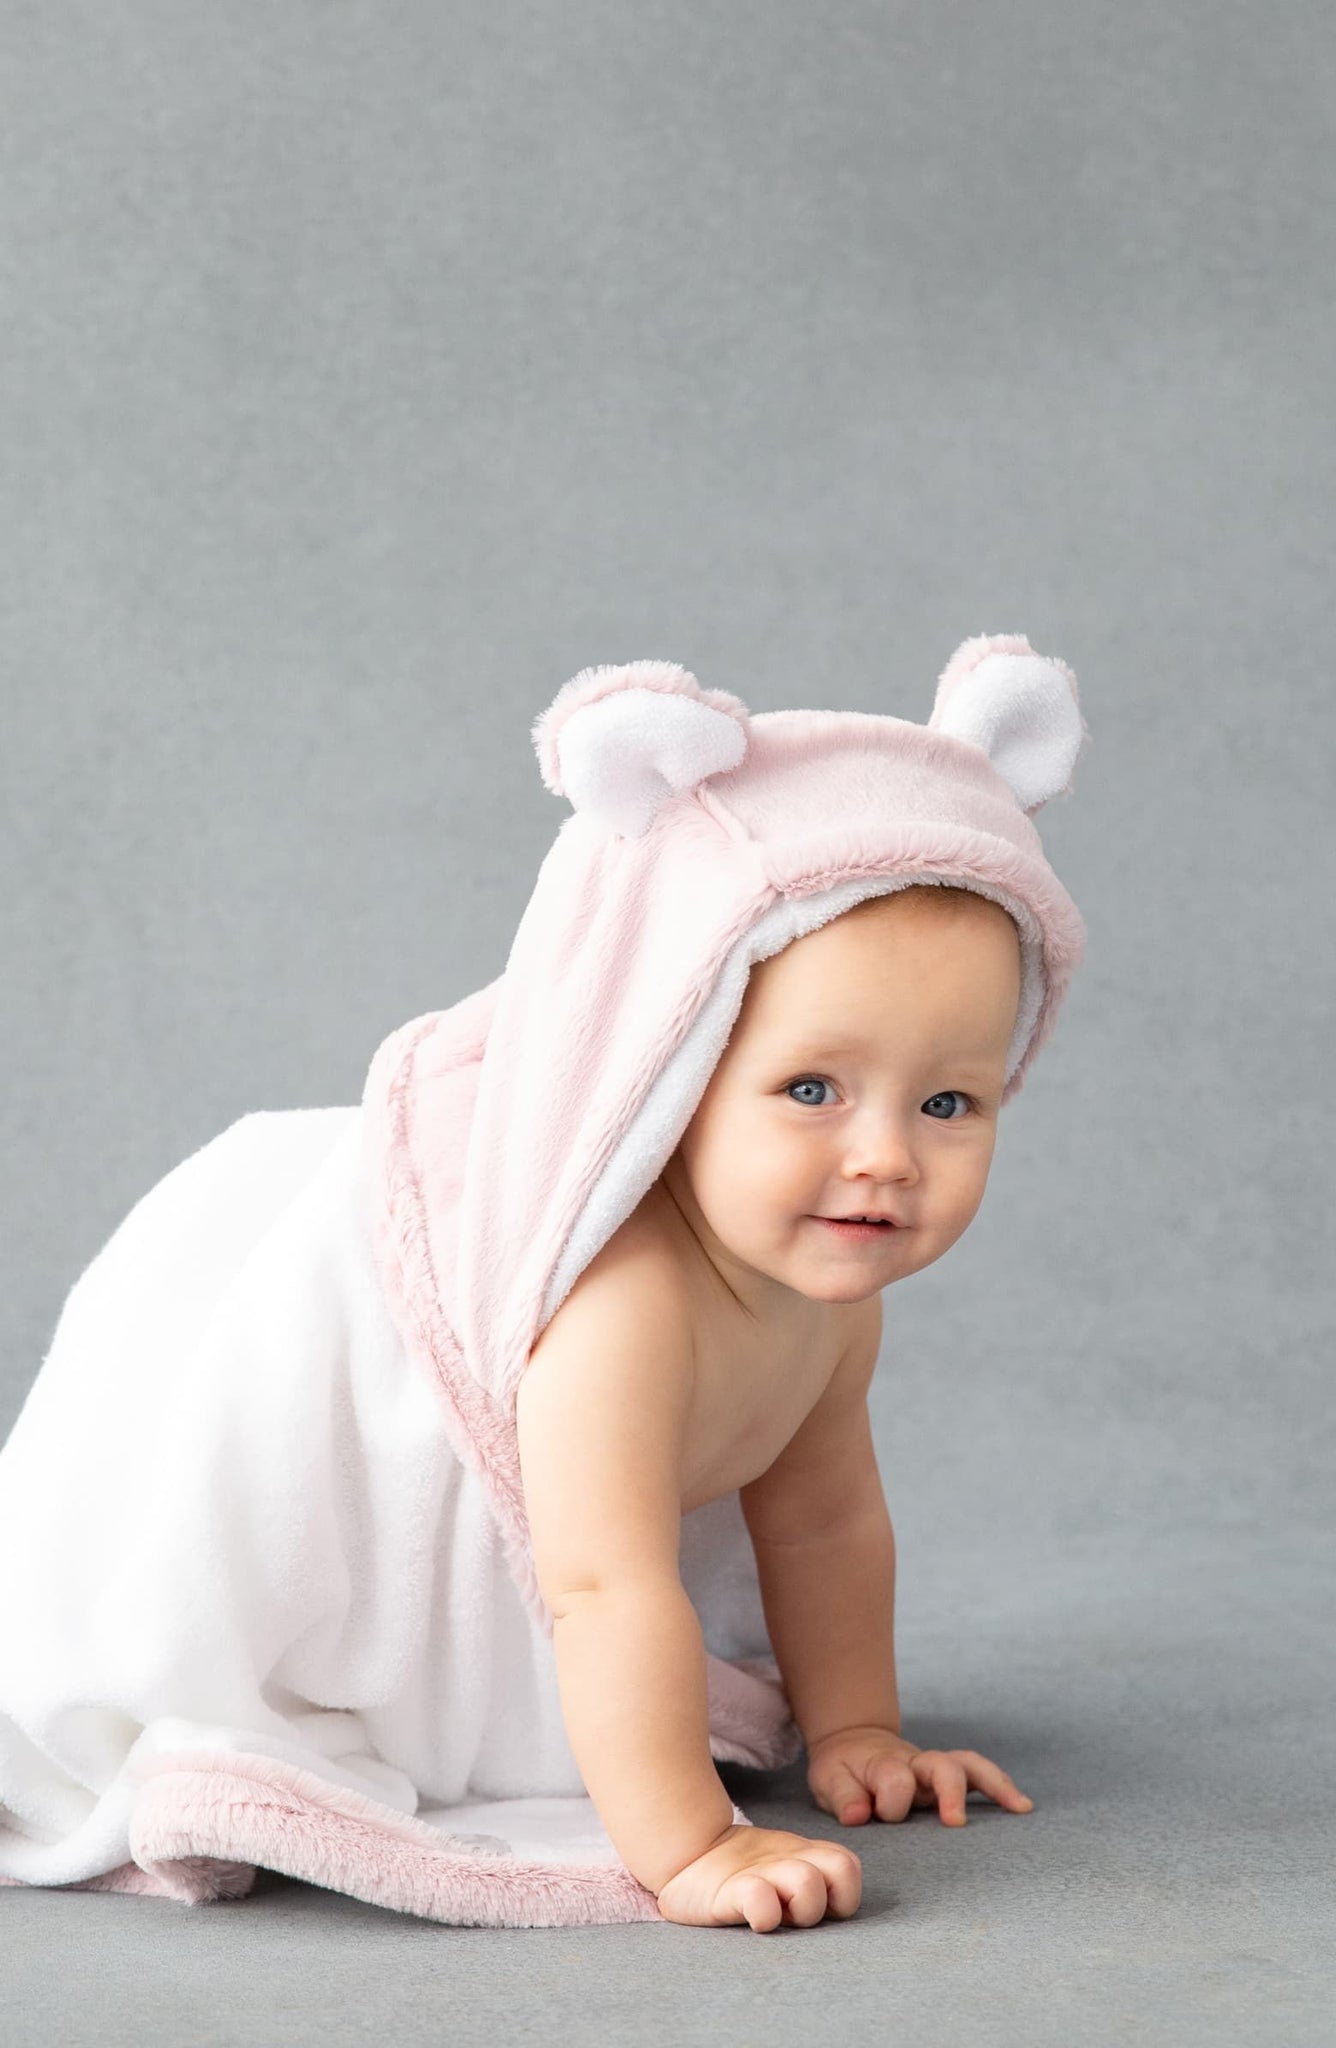 Chenille Hooded Towel- Pink